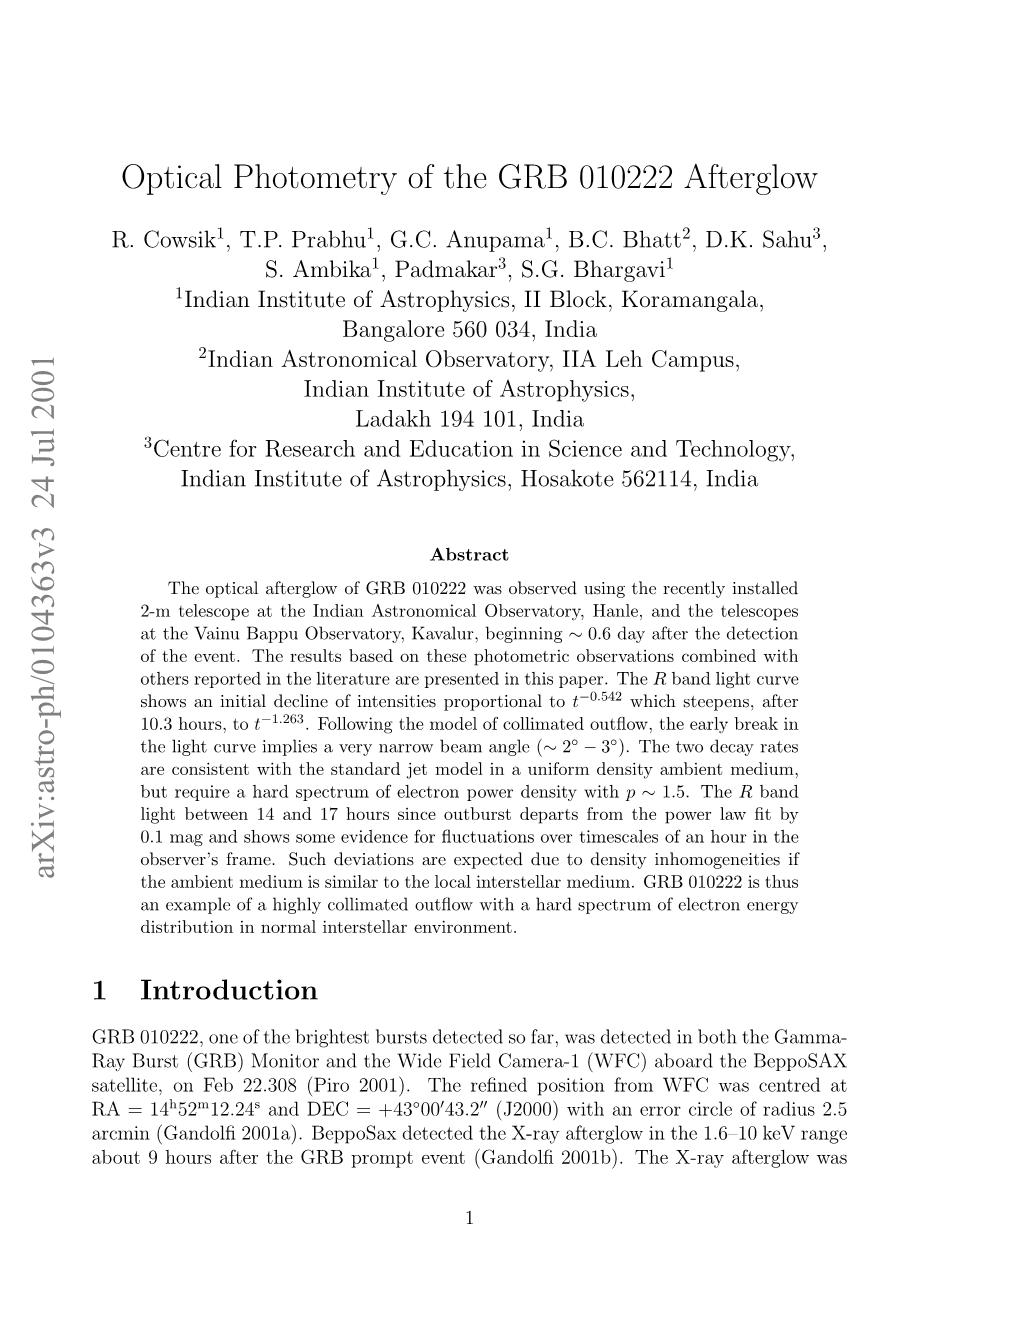 Optical Photometry of the GRB 010222 Afterglow